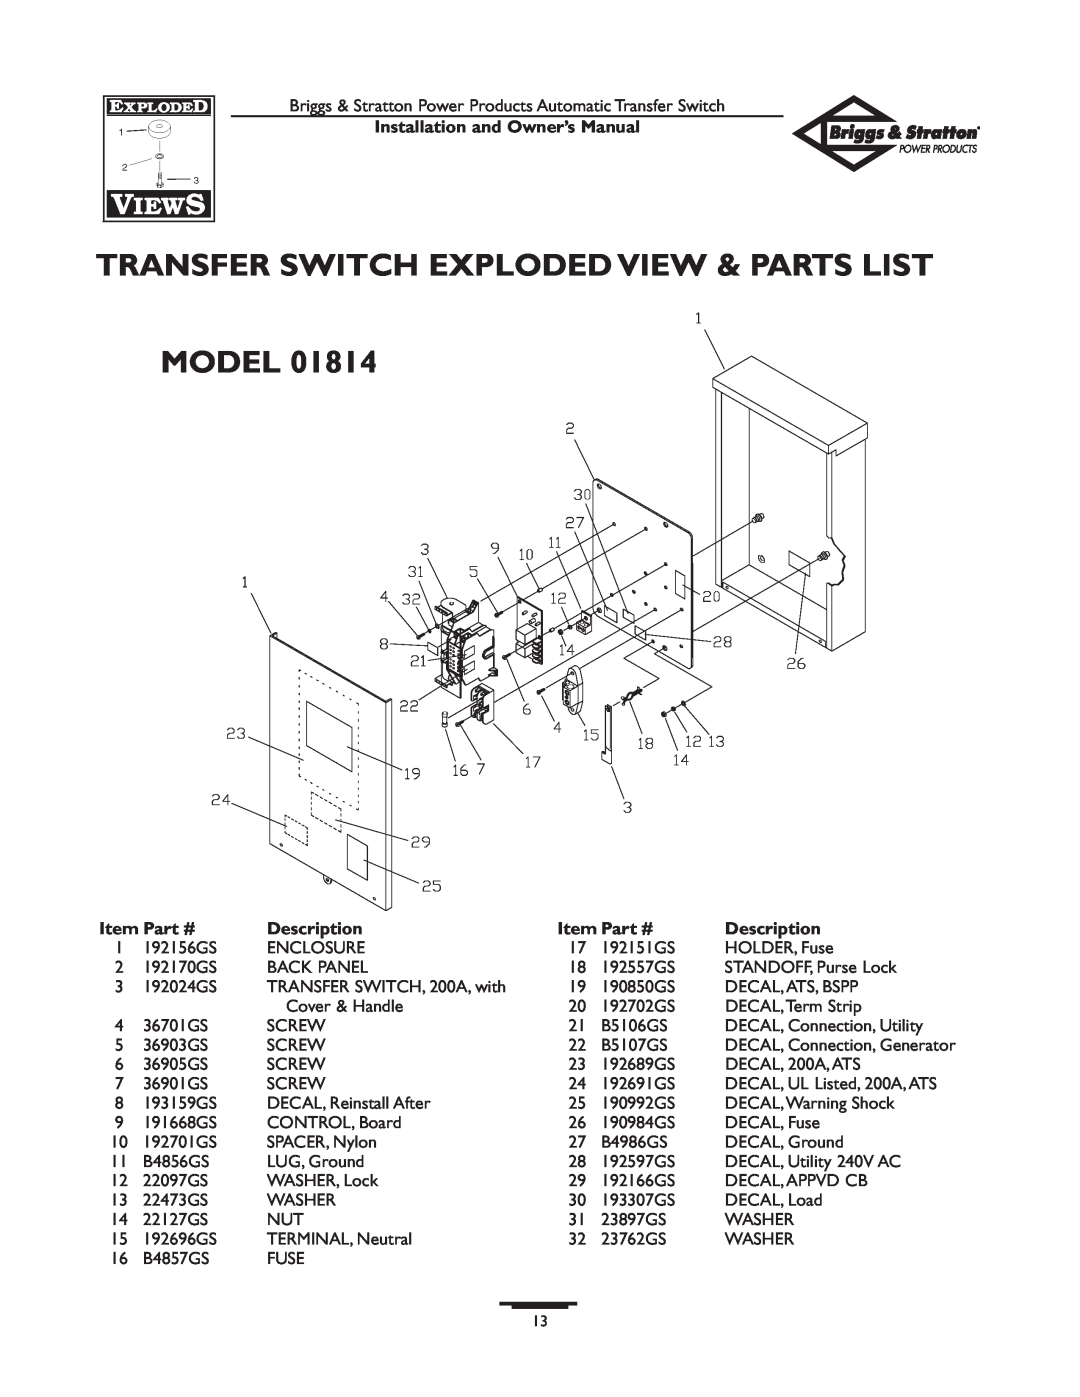 Briggs & Stratton 01813-0 Transfer Switch Exploded View & Parts List Model, Installation and Owner’s Manual, Description 